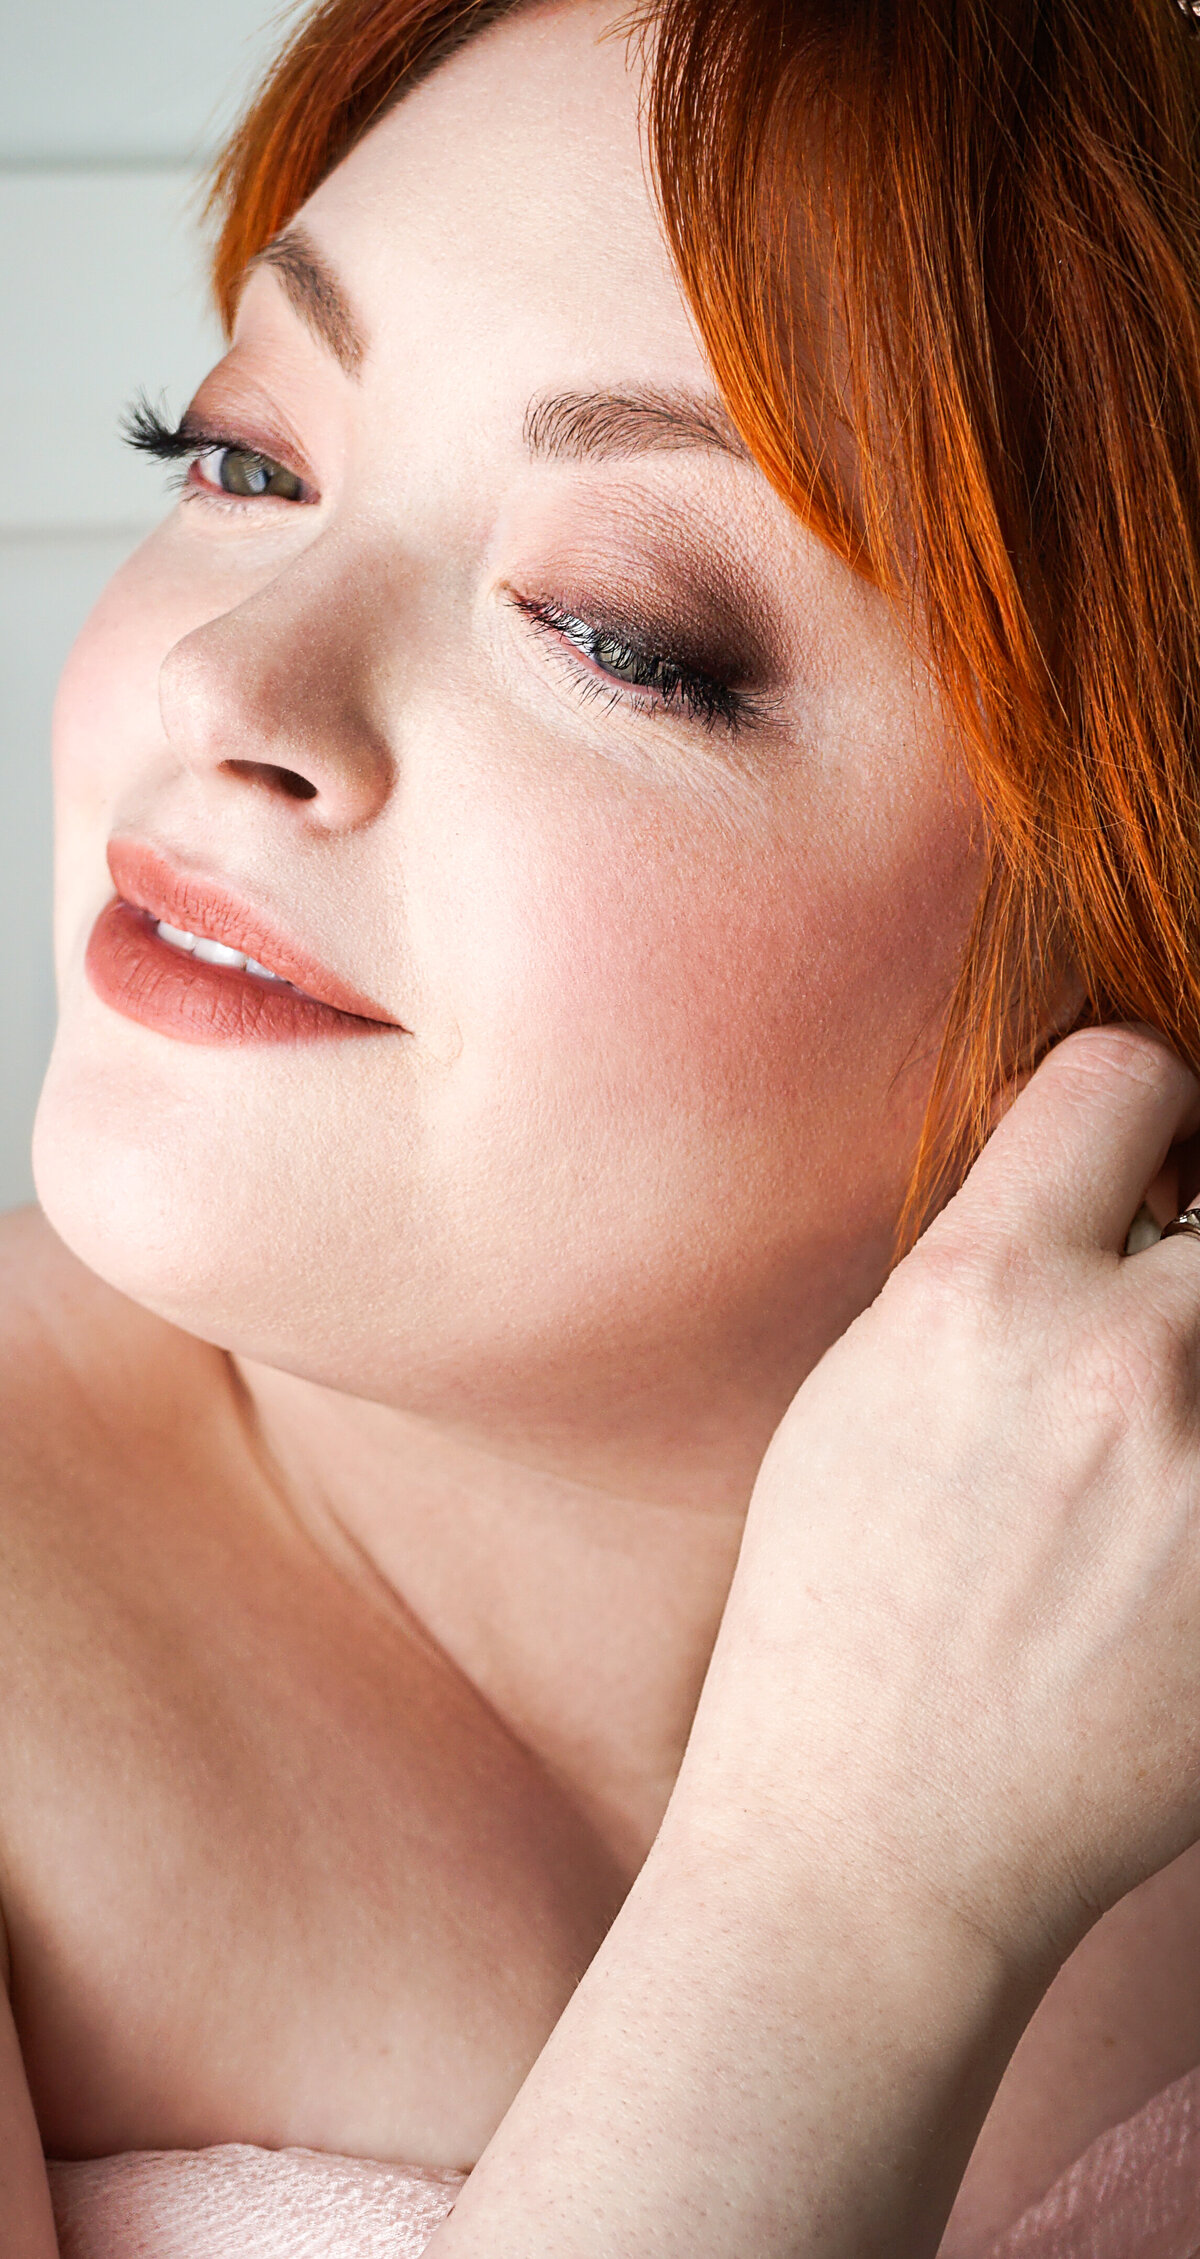 A redheaded bride places an earring in her ear while wearing soft, natural makeup and a smile.